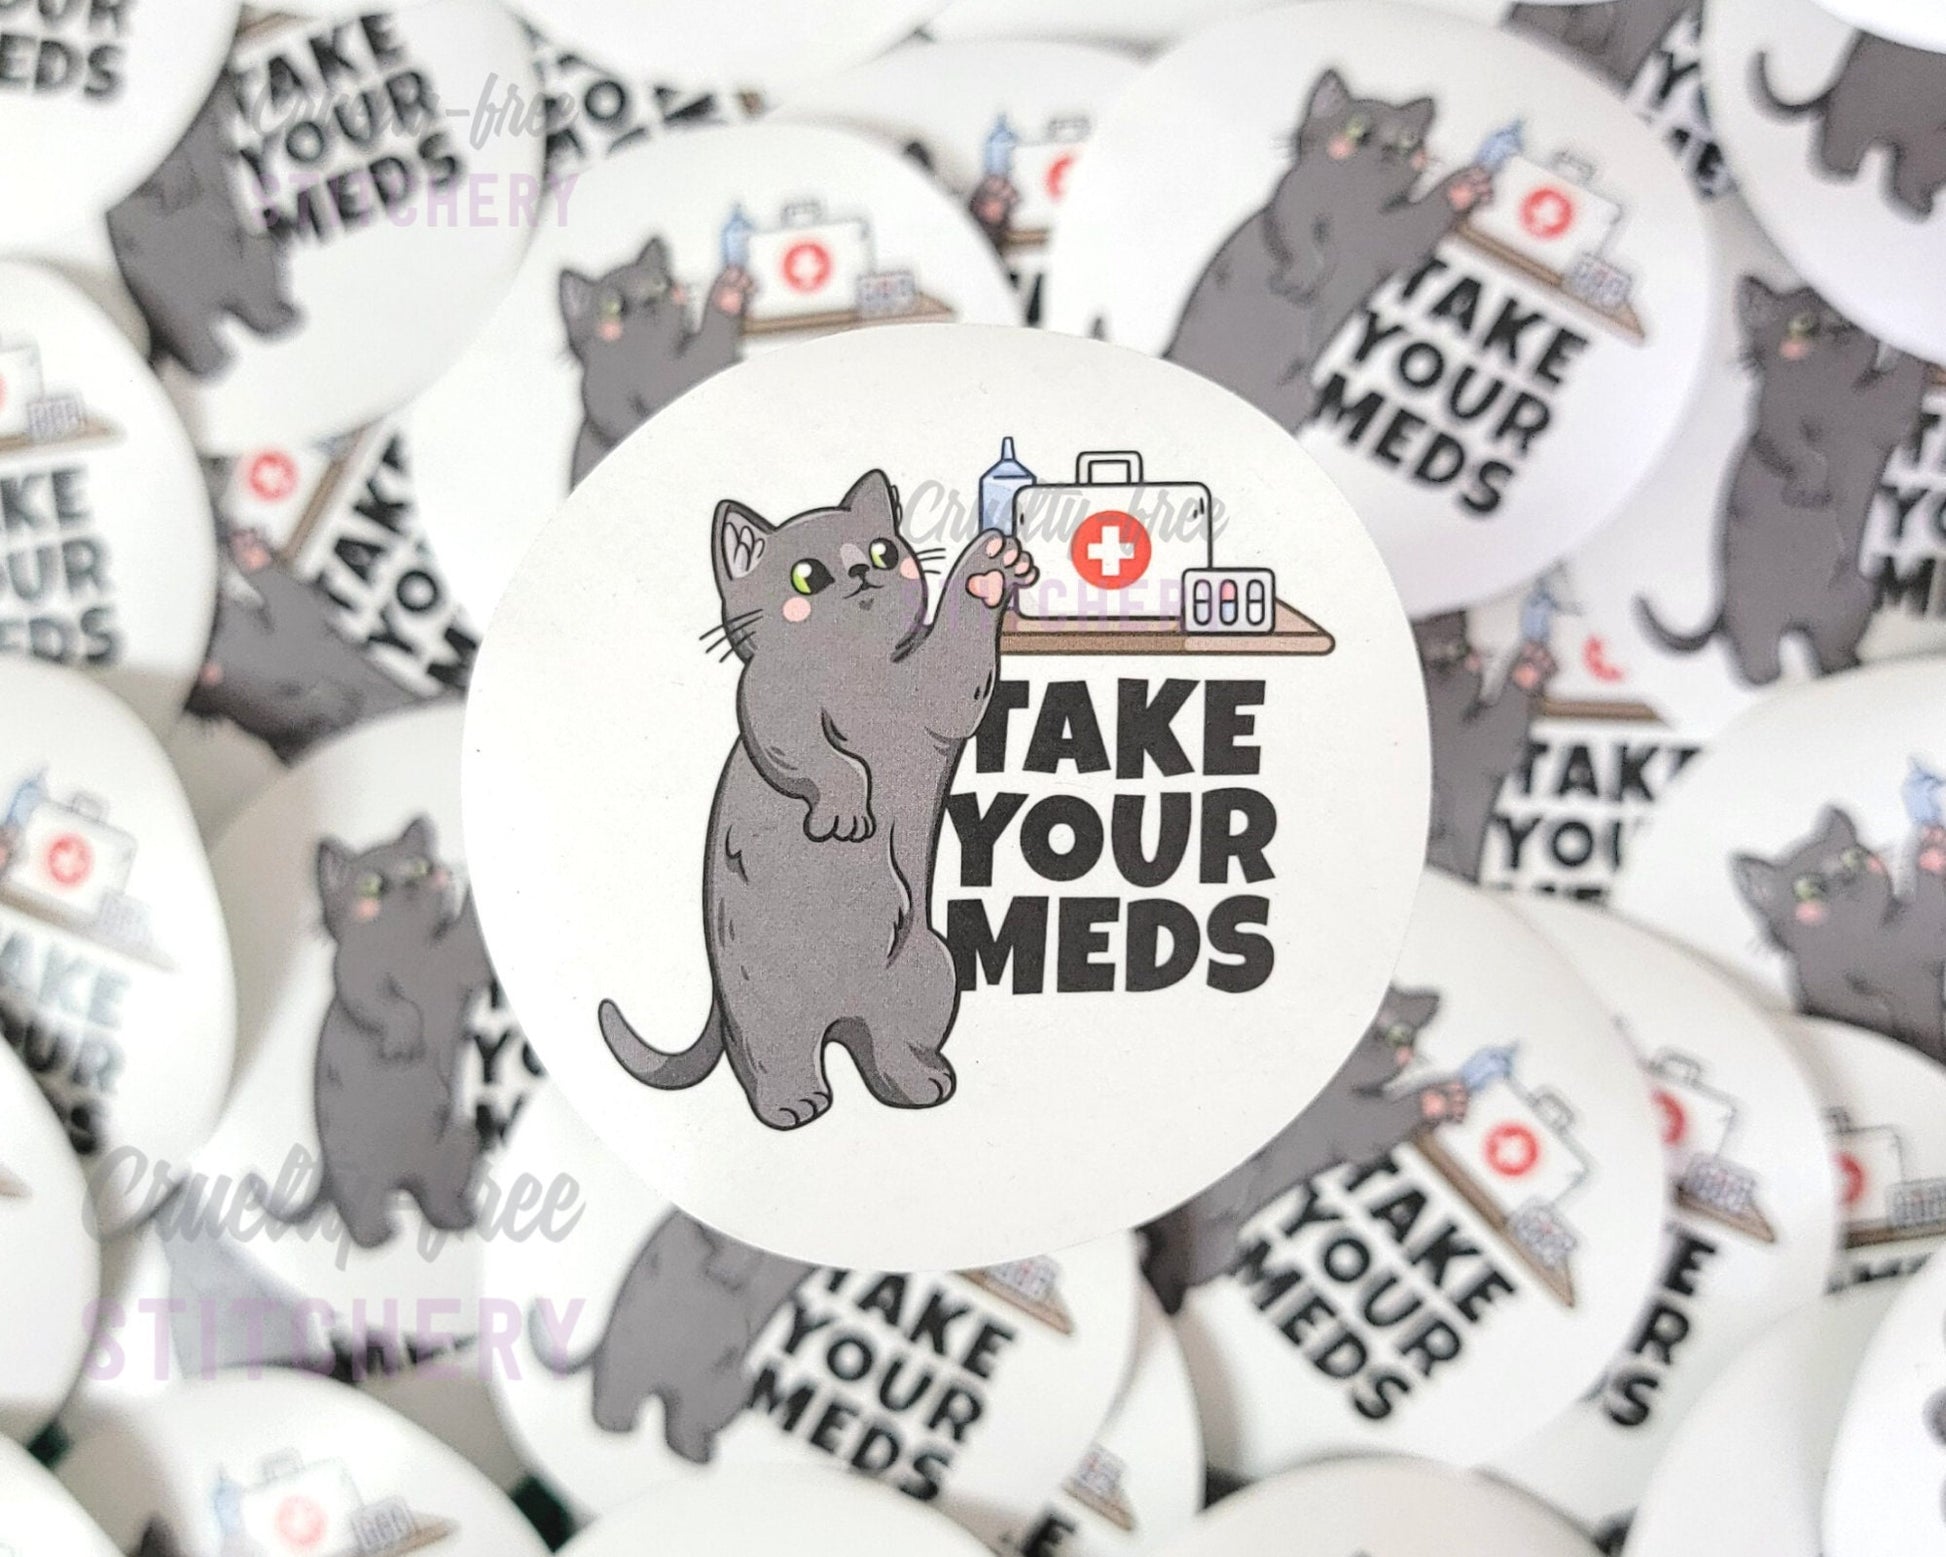 Round sticker that says &quot;take your meds&quot; with a cartoon grey cat reaching for a shelf with a first-aid kit and medicines.